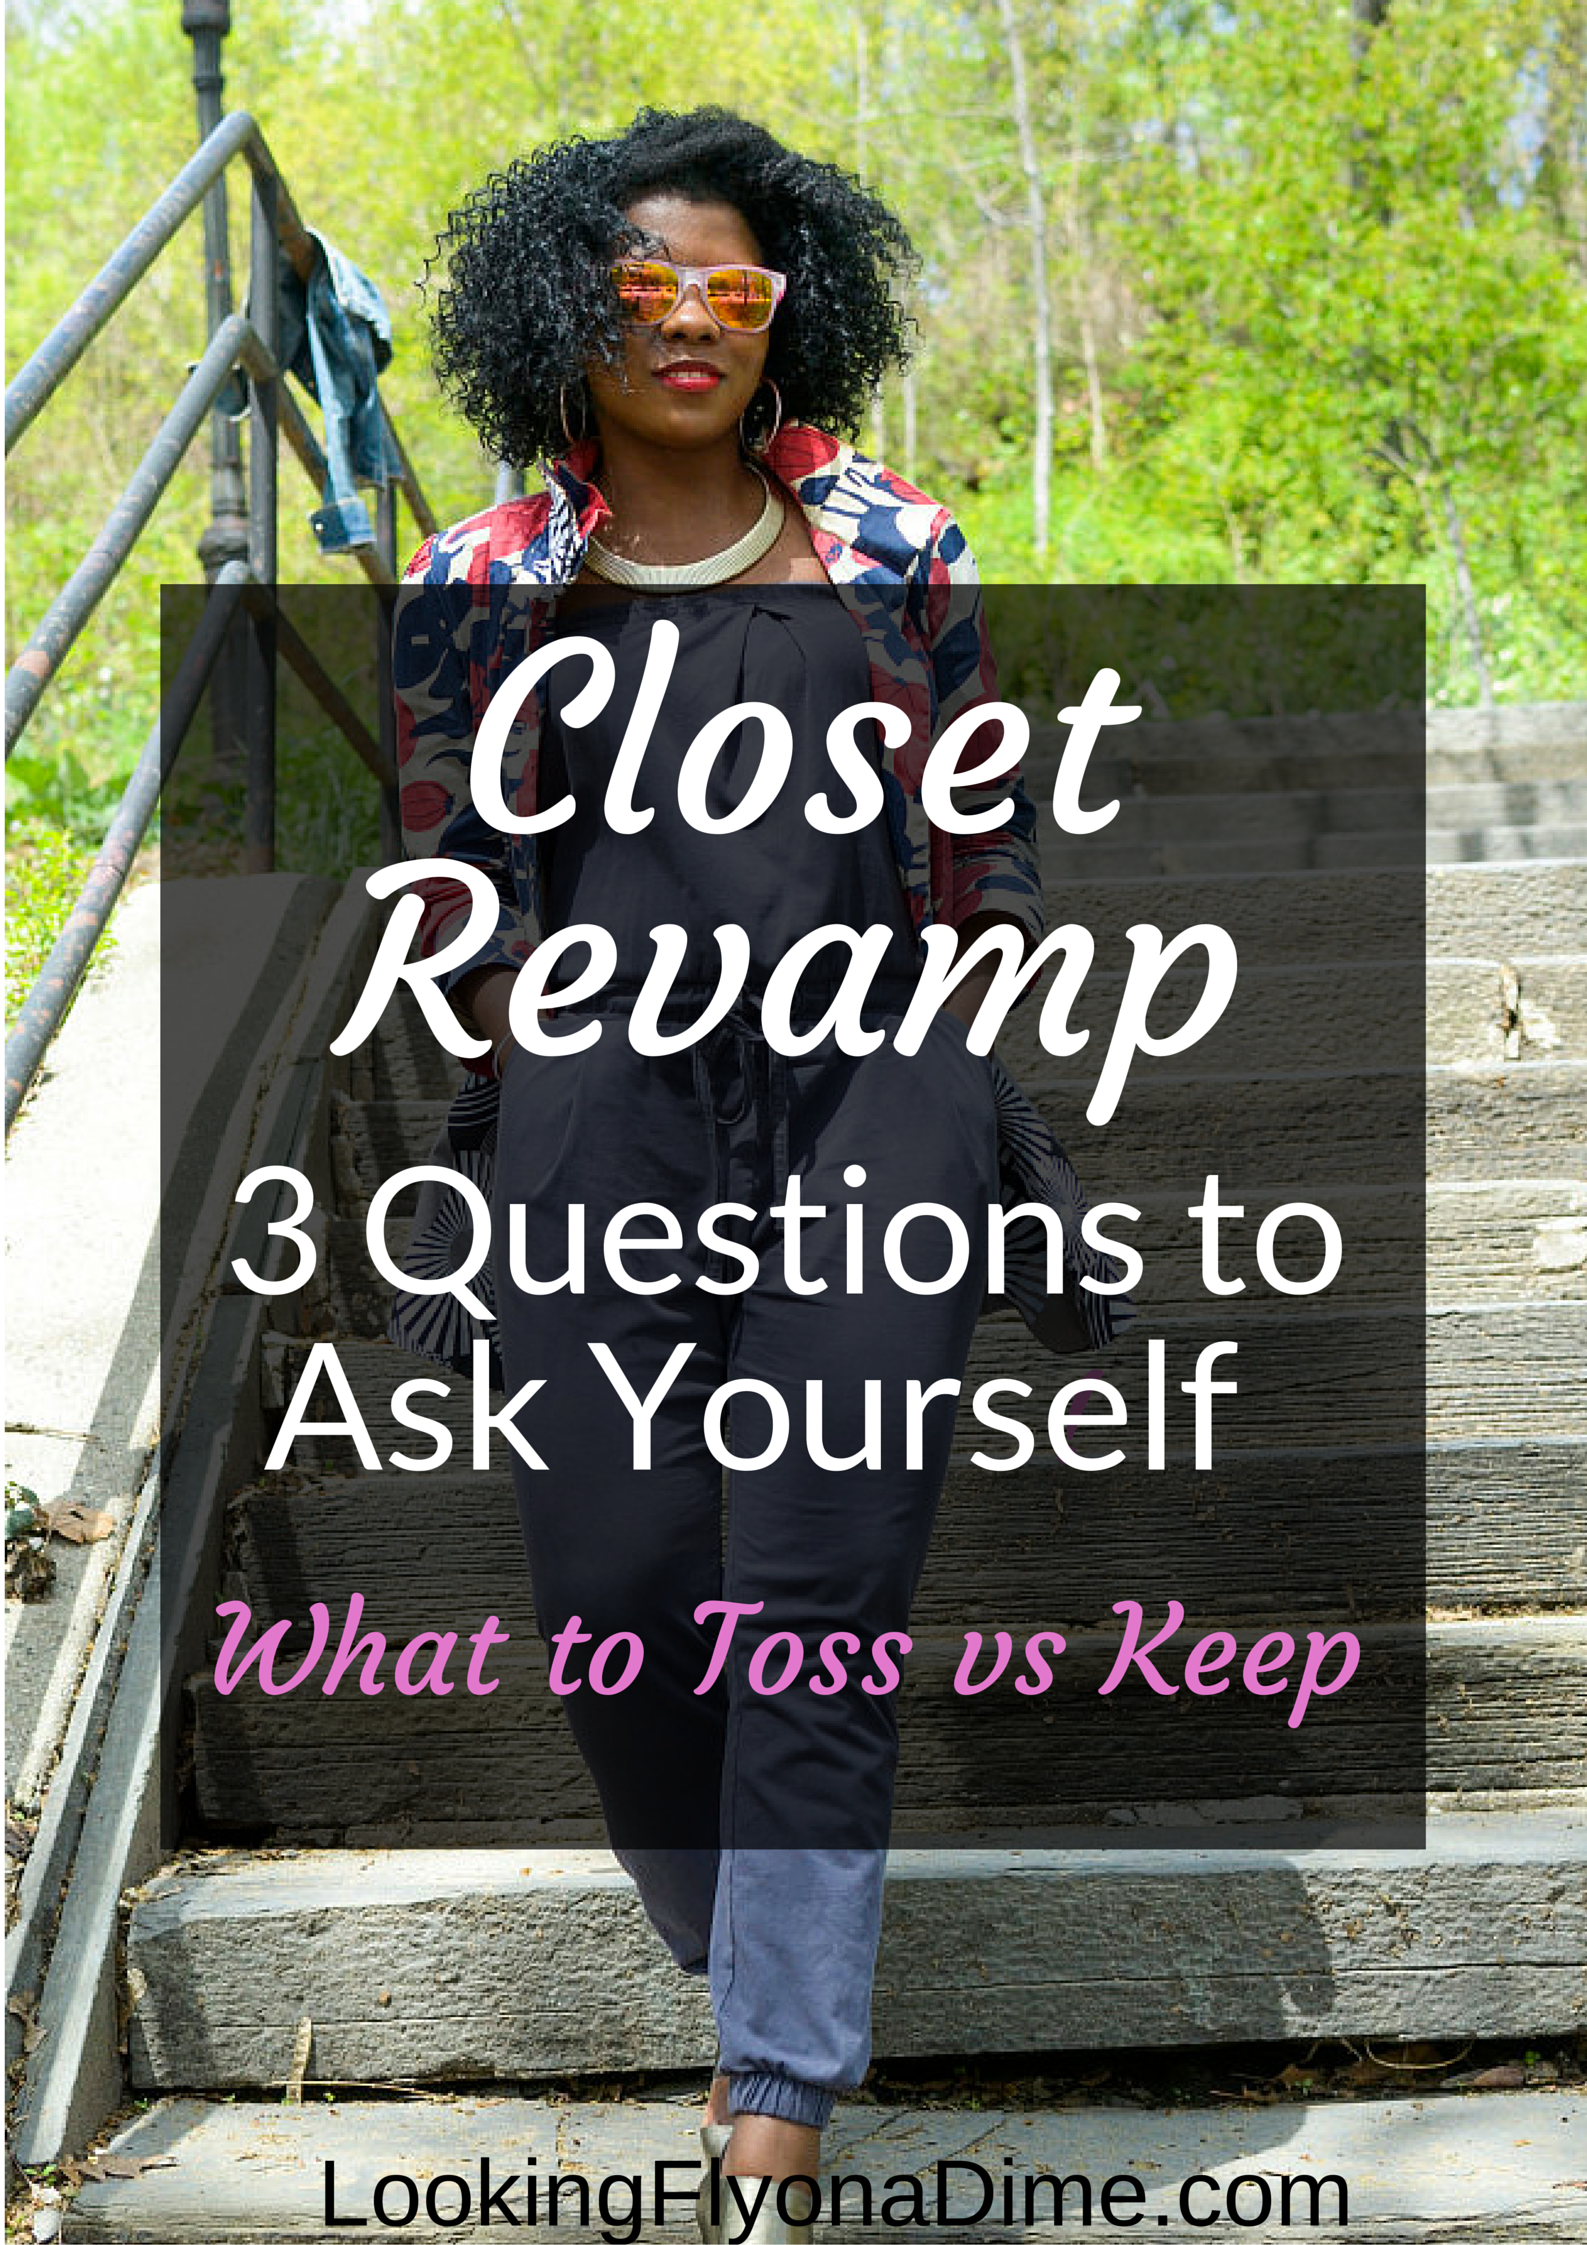 Closet Cleanout Tips: What to Keep & Toss